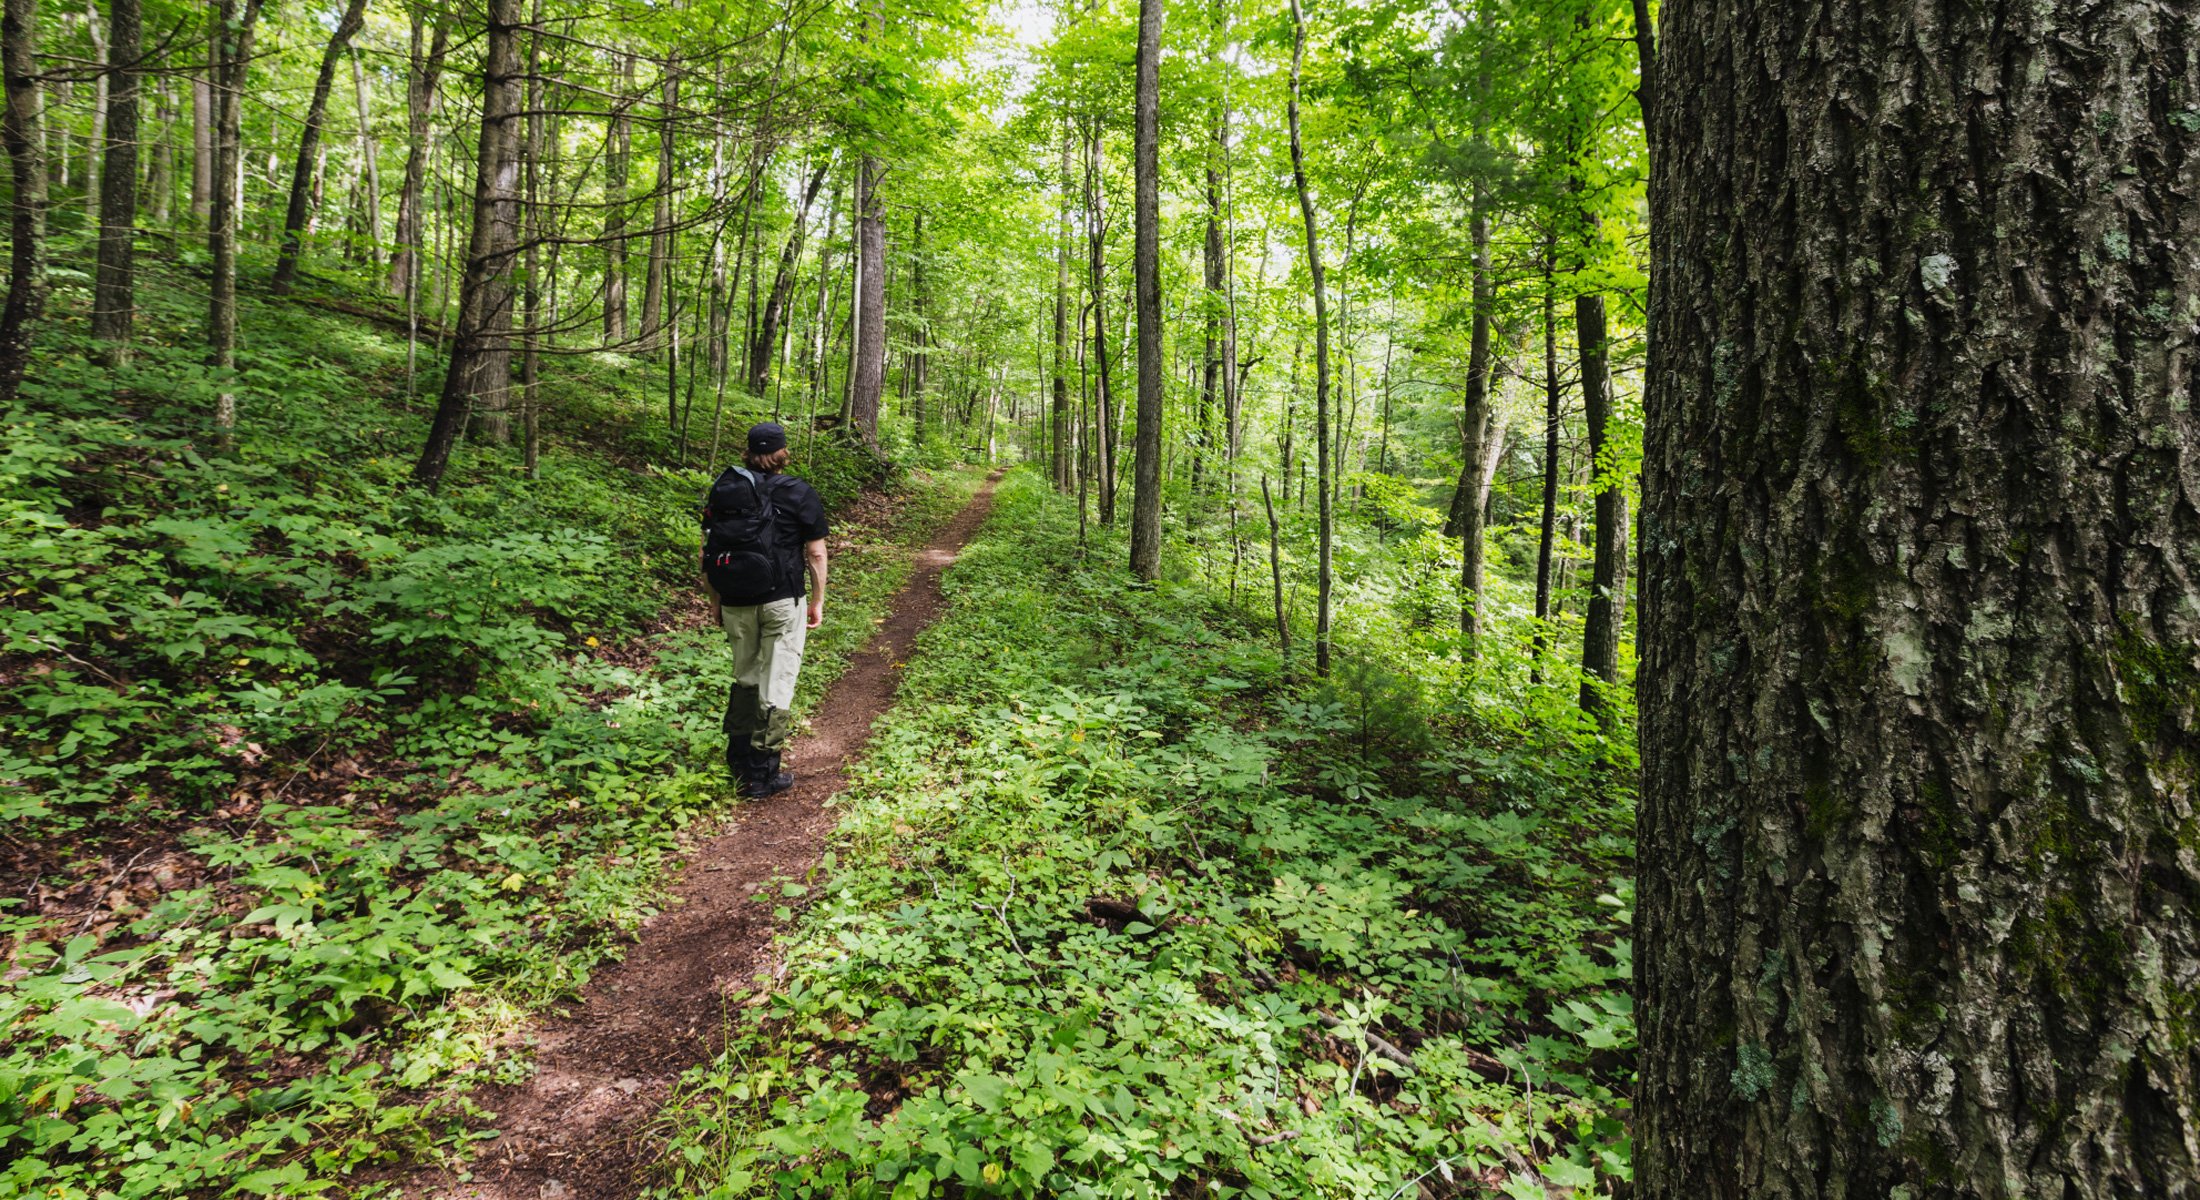 A man with a backpack walks down a forested trail with a large tree in the foreground